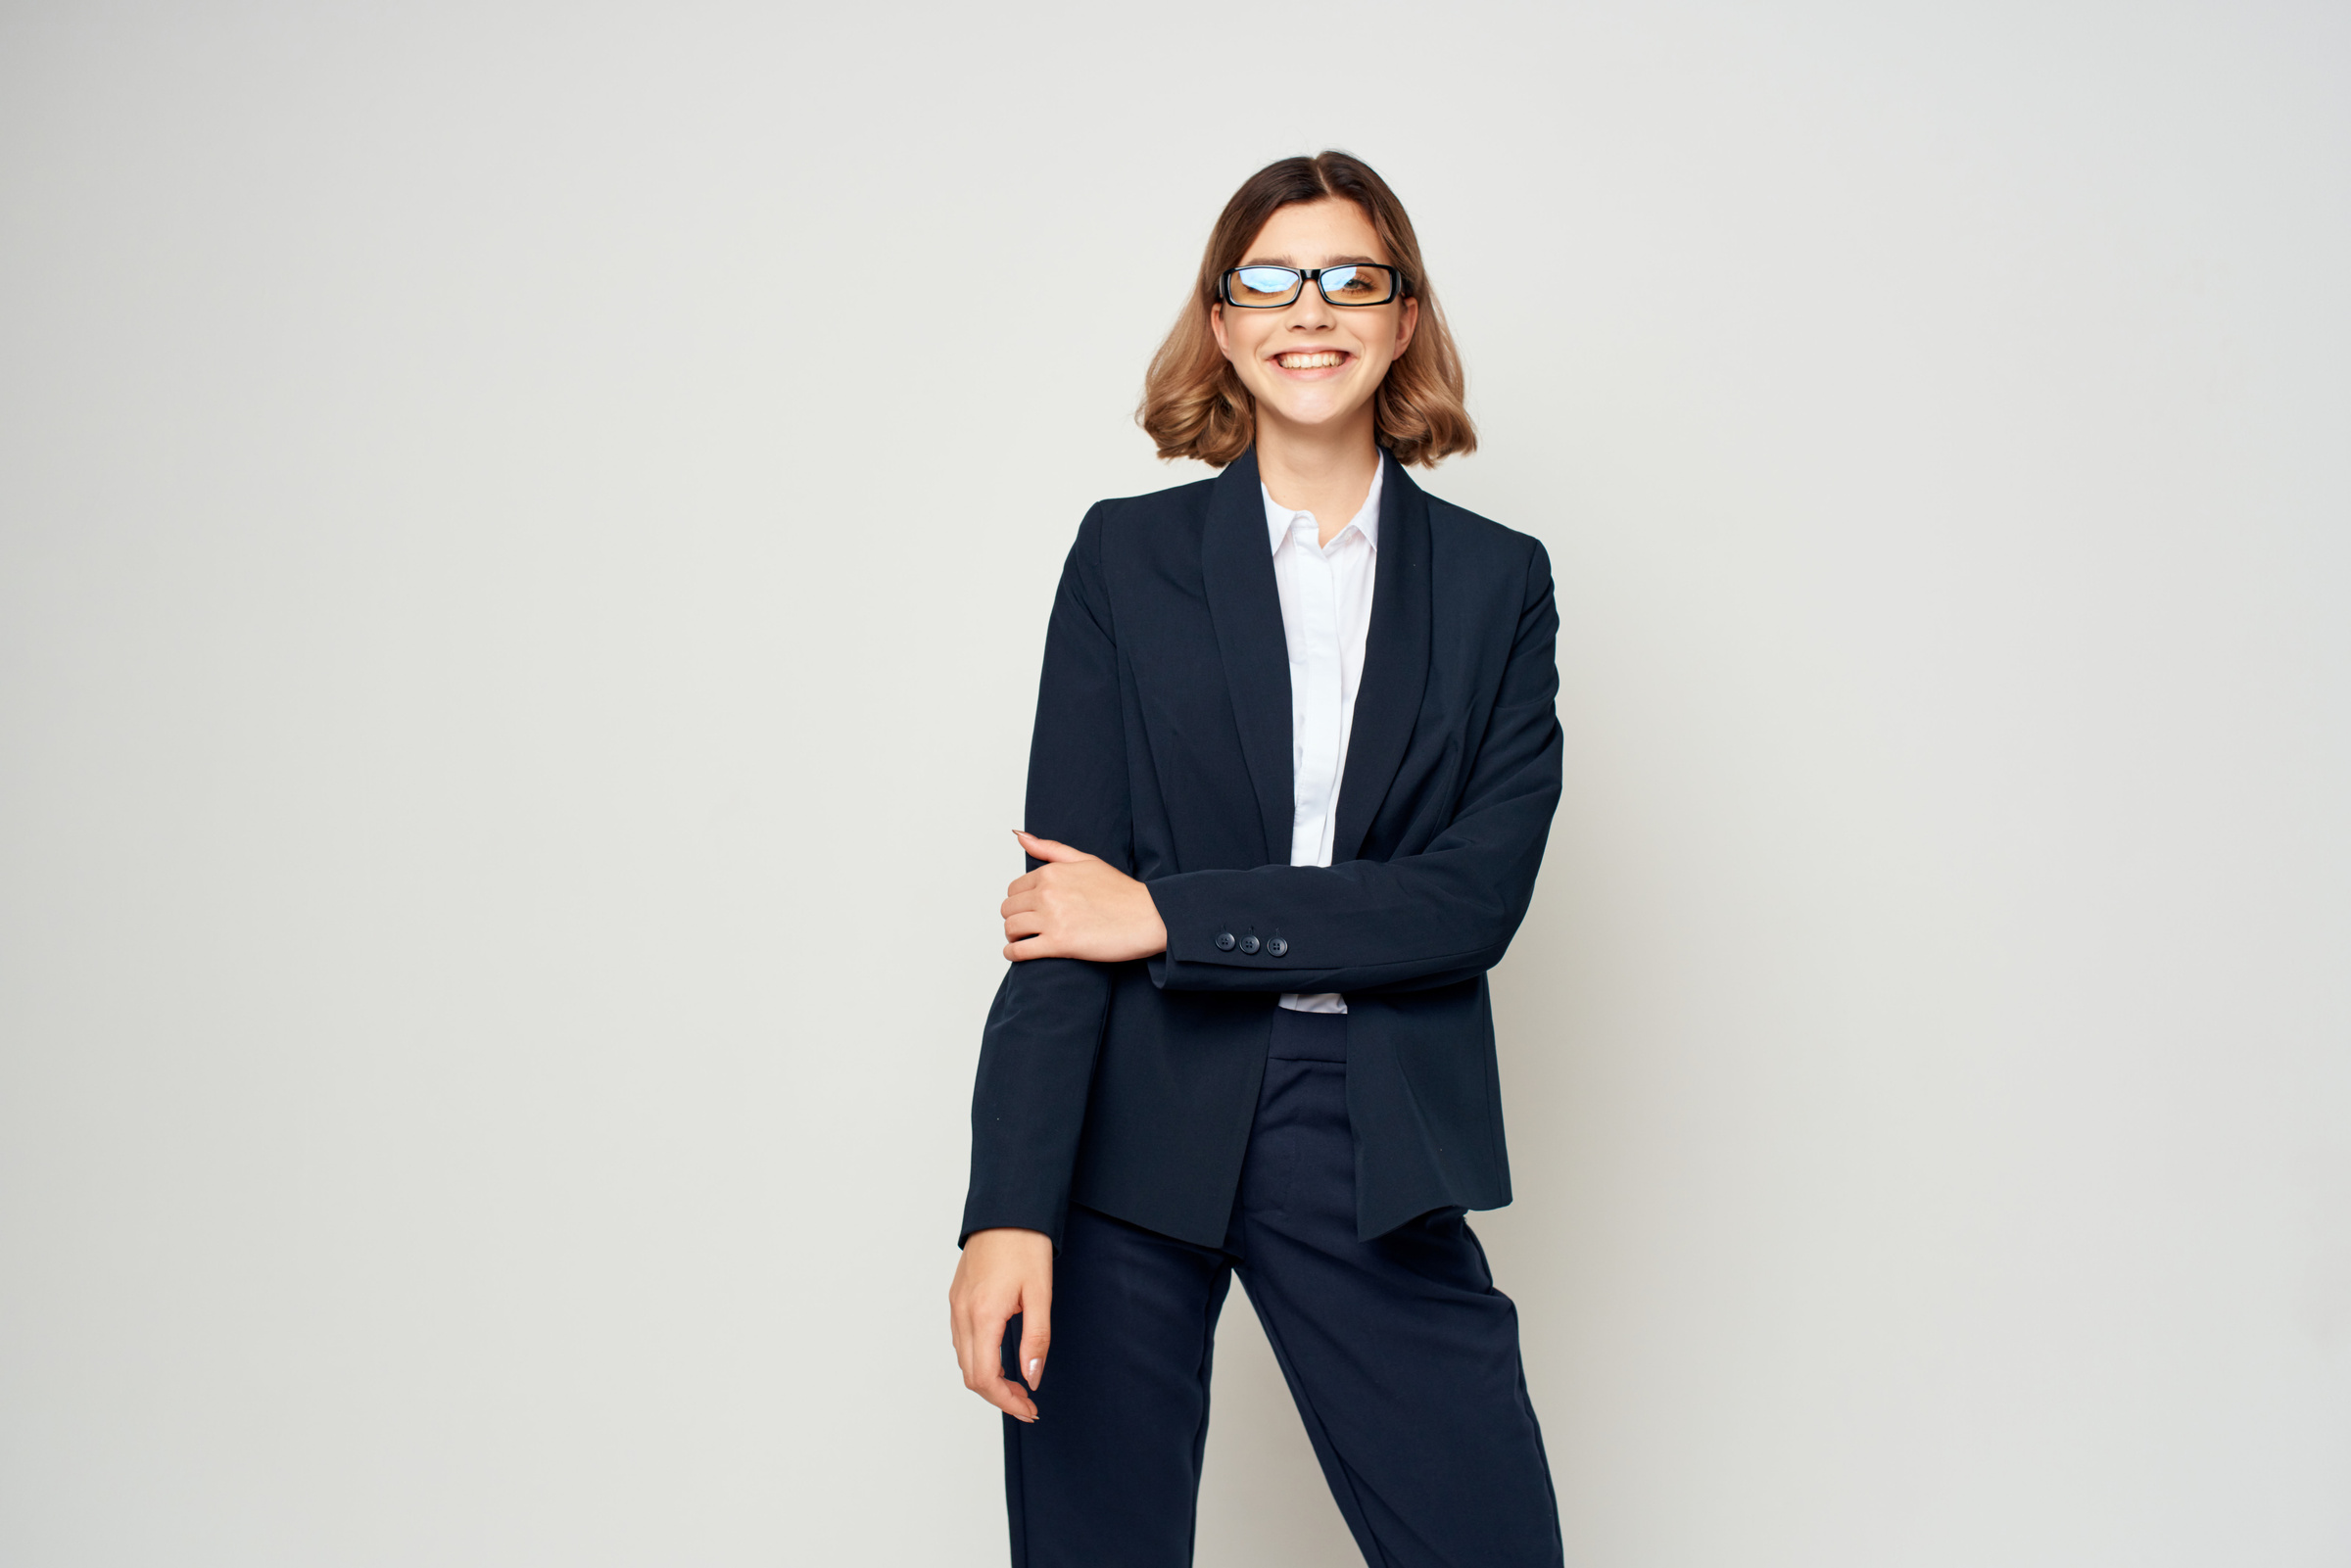 Pretty Business Woman in Suit Posing Work Official